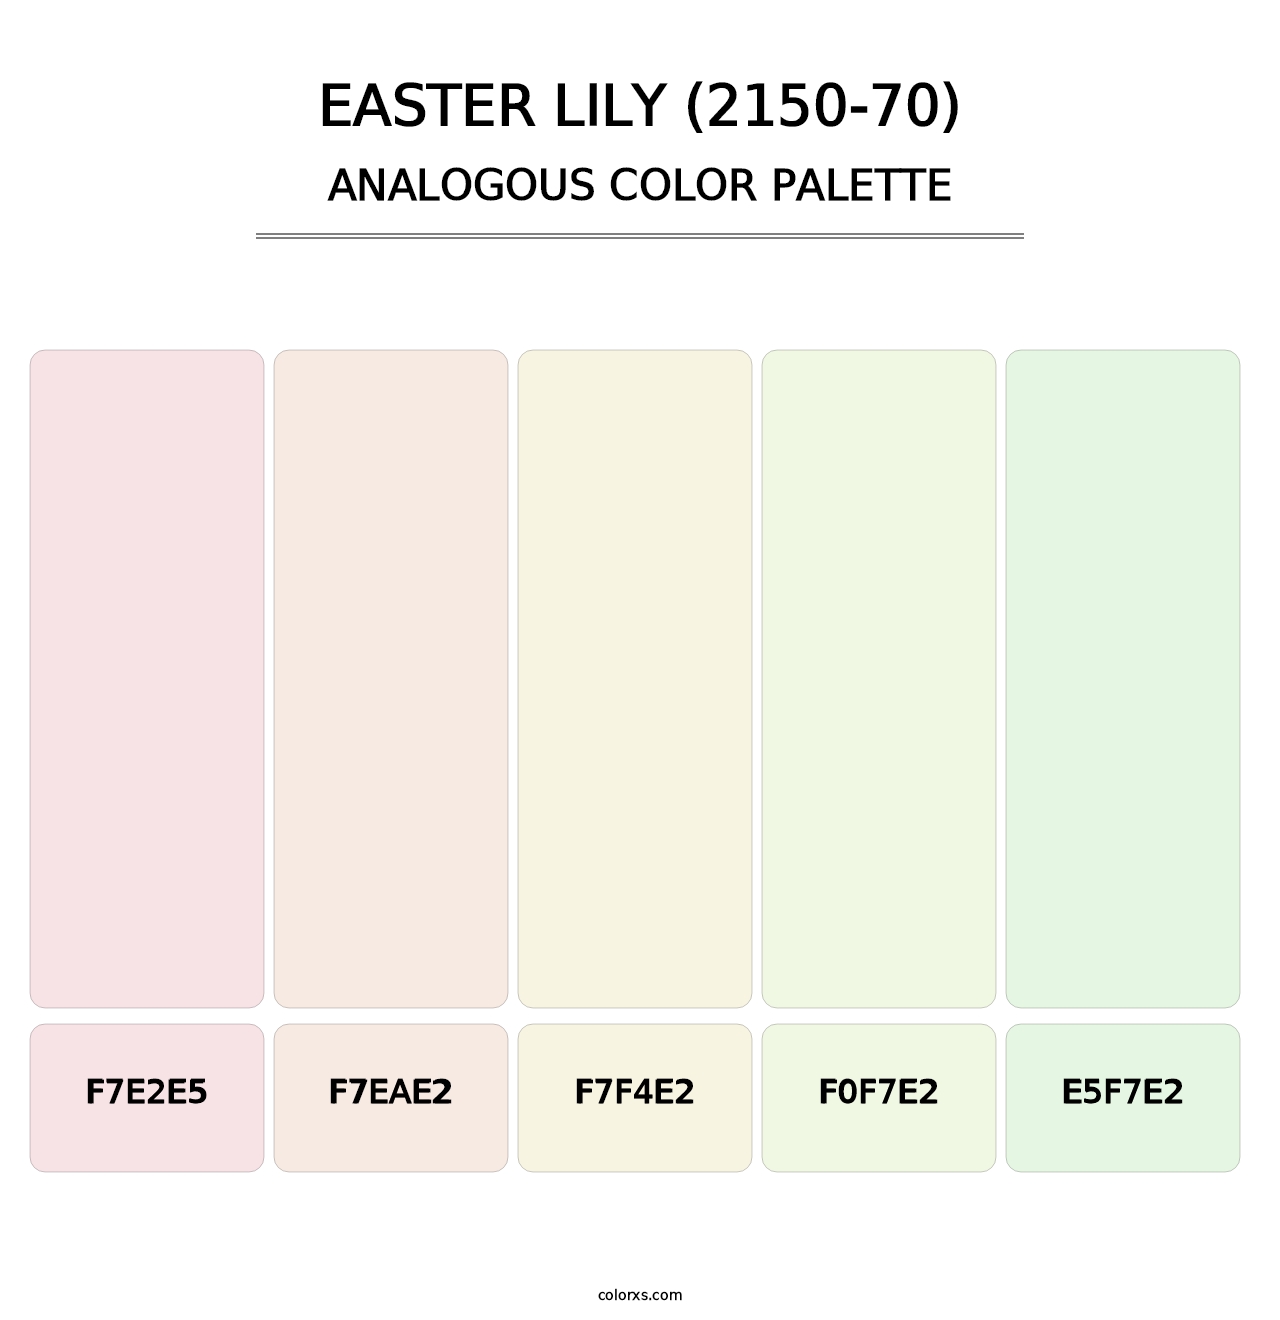 Easter Lily (2150-70) - Analogous Color Palette